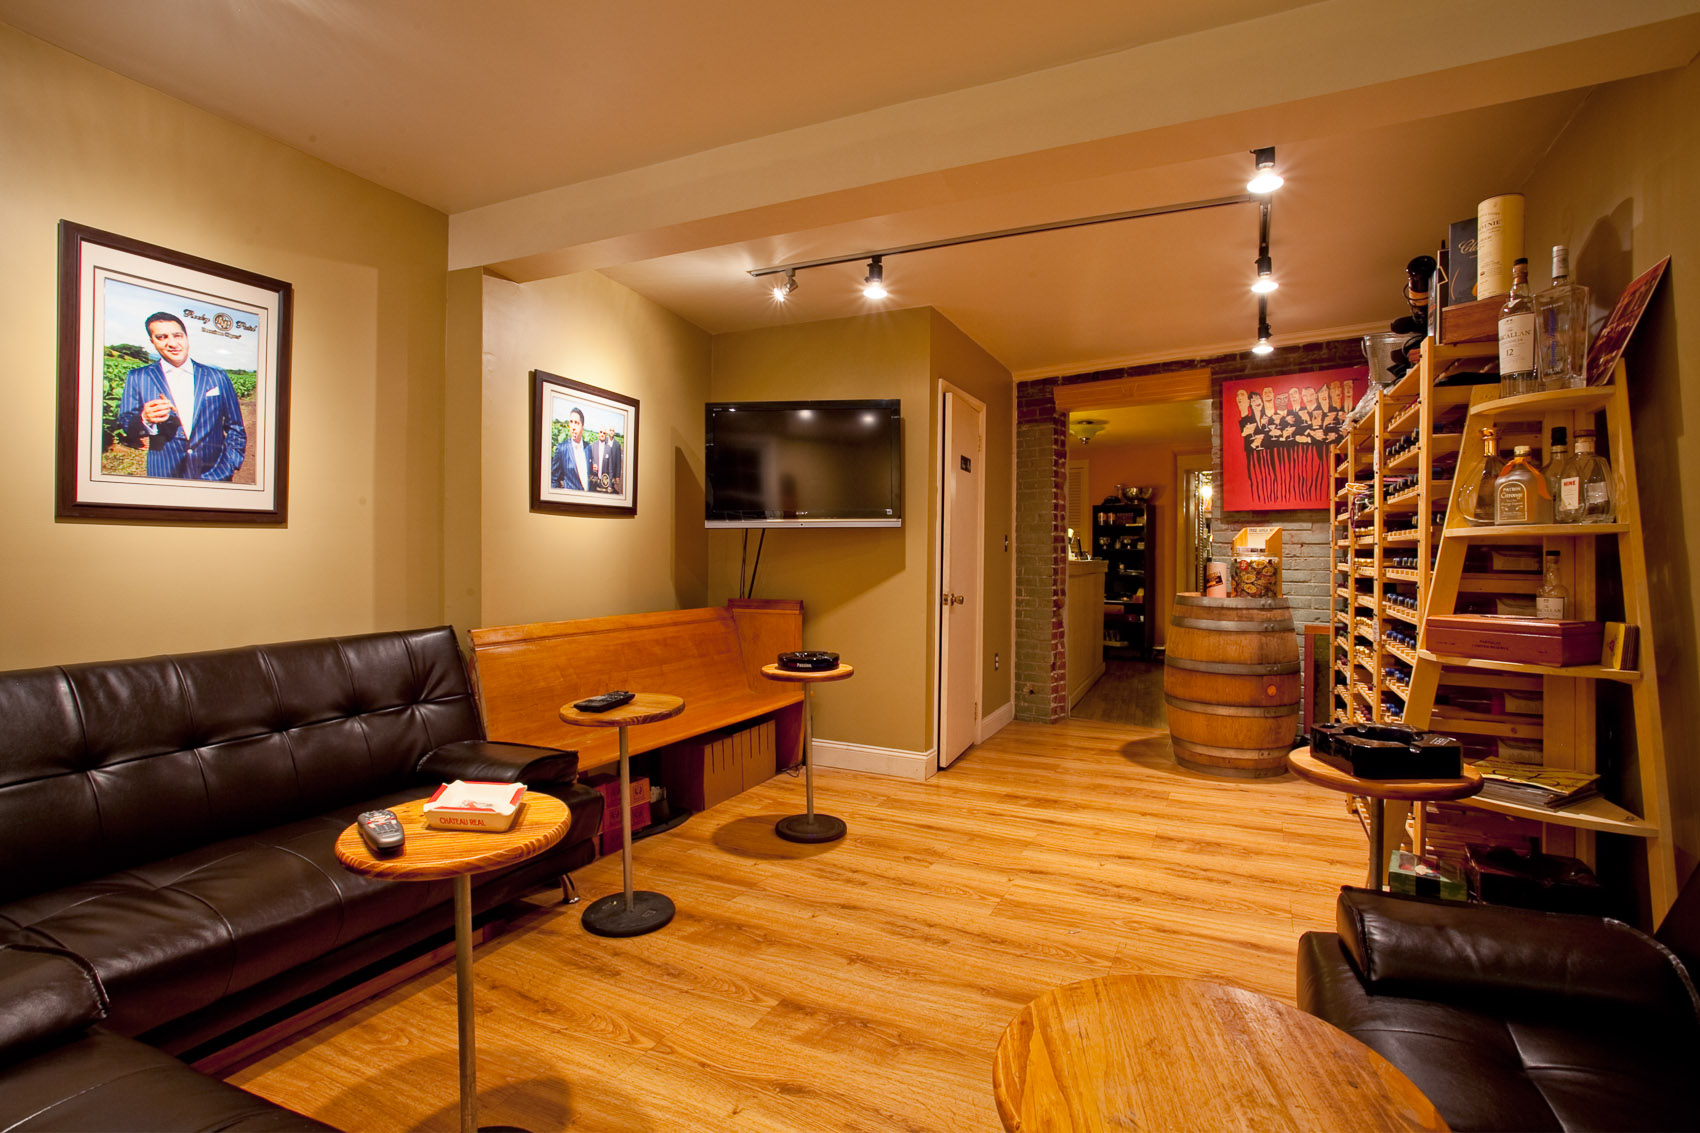 Commercial Interior of BnB International Cigars in Chestnut Hill, PA | J. Eldon Zimmerman Photography | Lancaster, PA Architecture Photographer